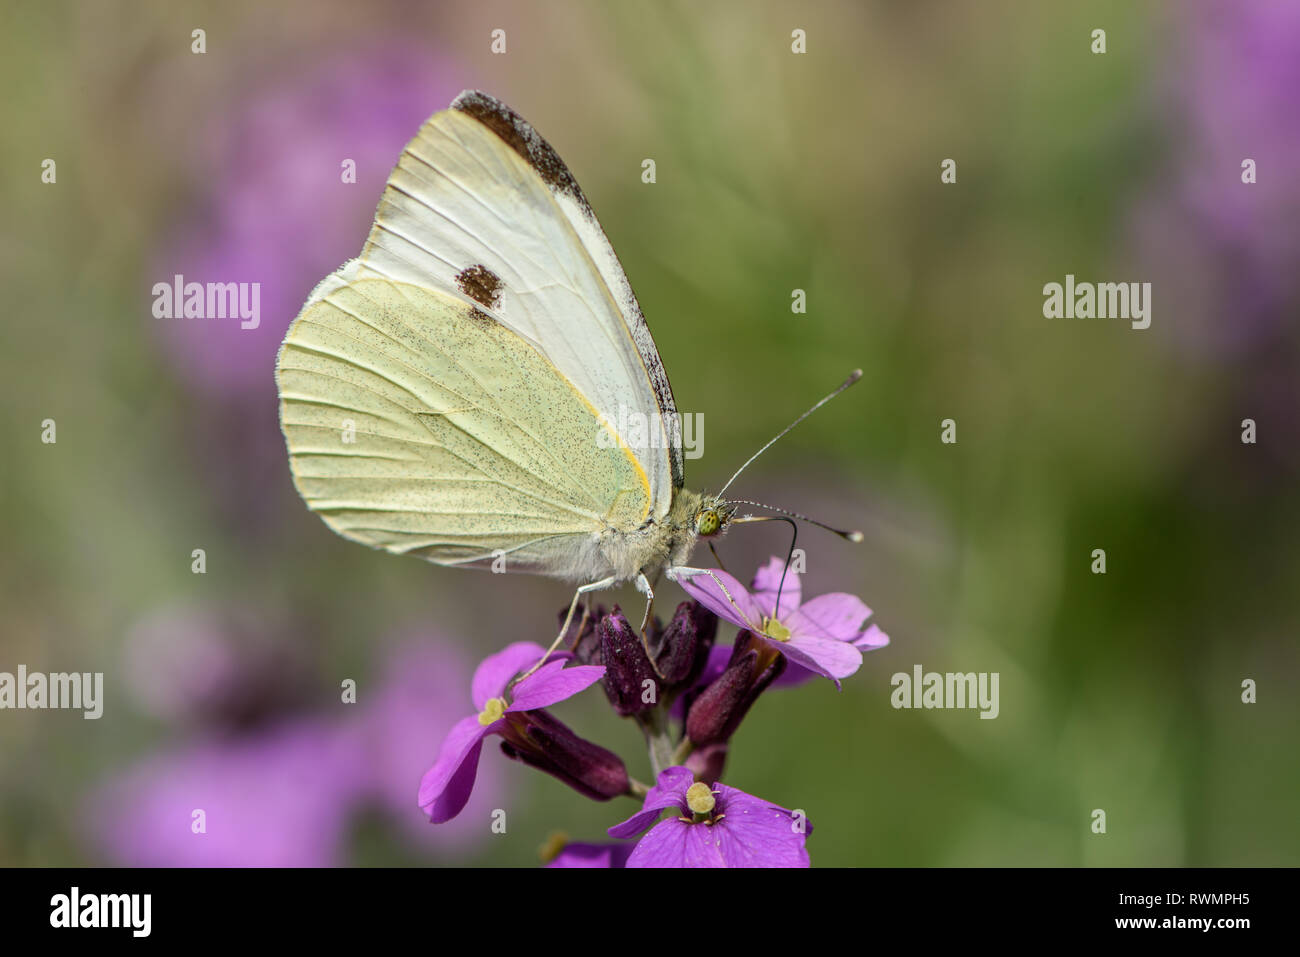 A cabbage white butterfly on a purple flower of the Erysimum Bowles Mauve Stock Photo